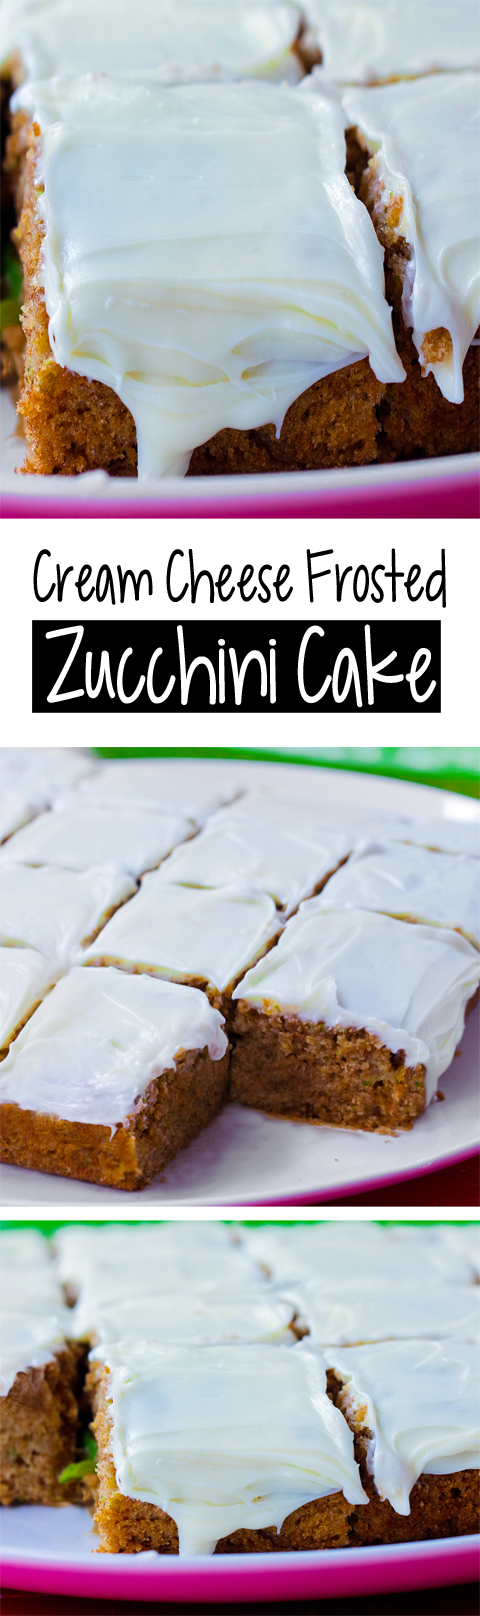 Easy Zucchini Cake With Cream Cheese Frosting